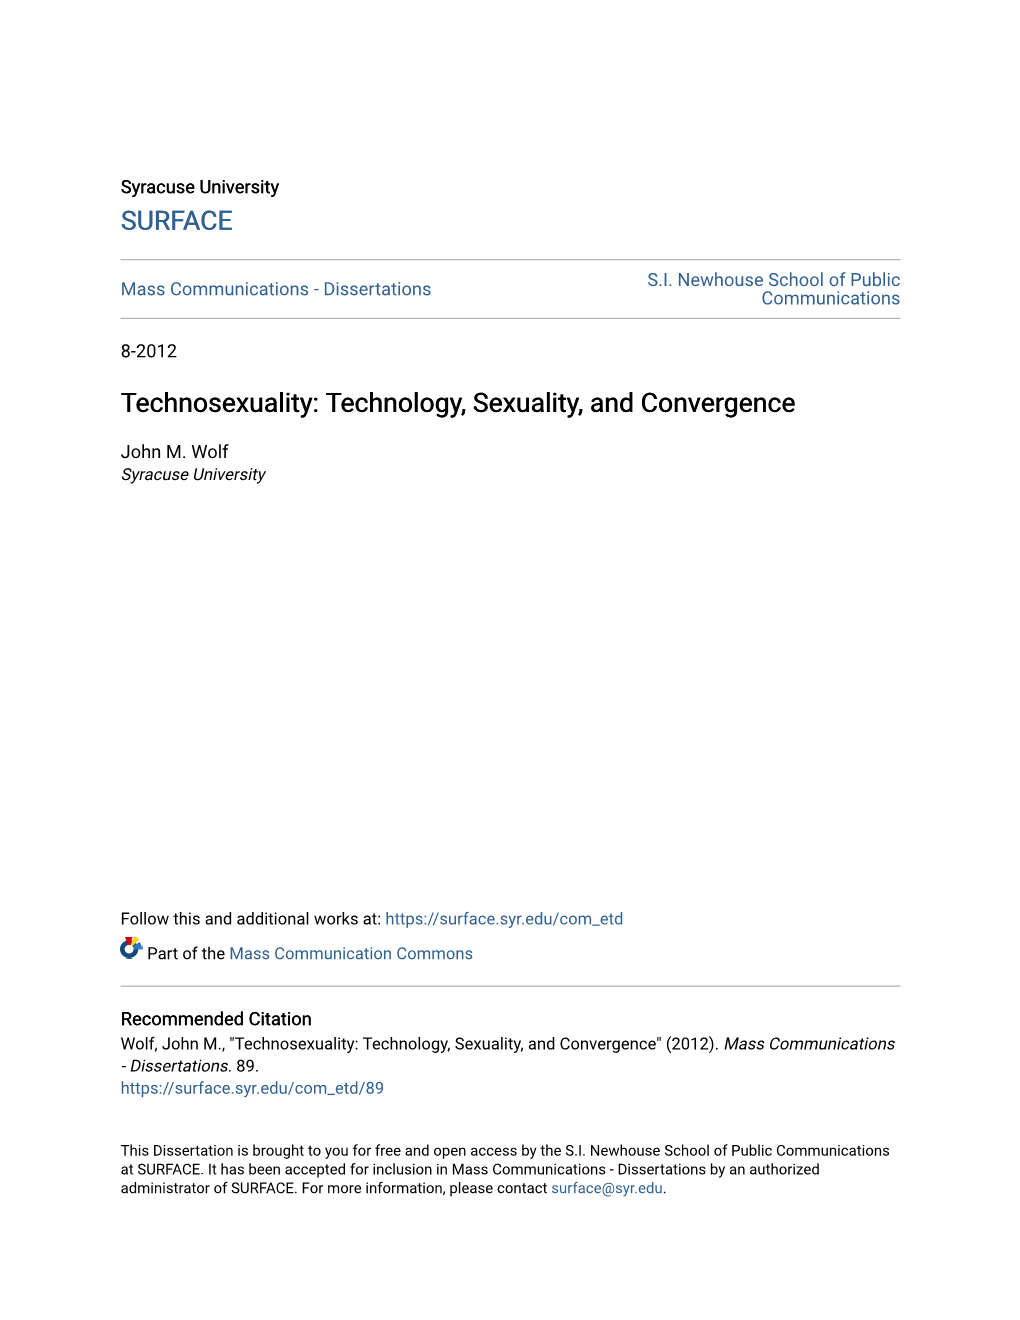 Technosexuality: Technology, Sexuality, and Convergence